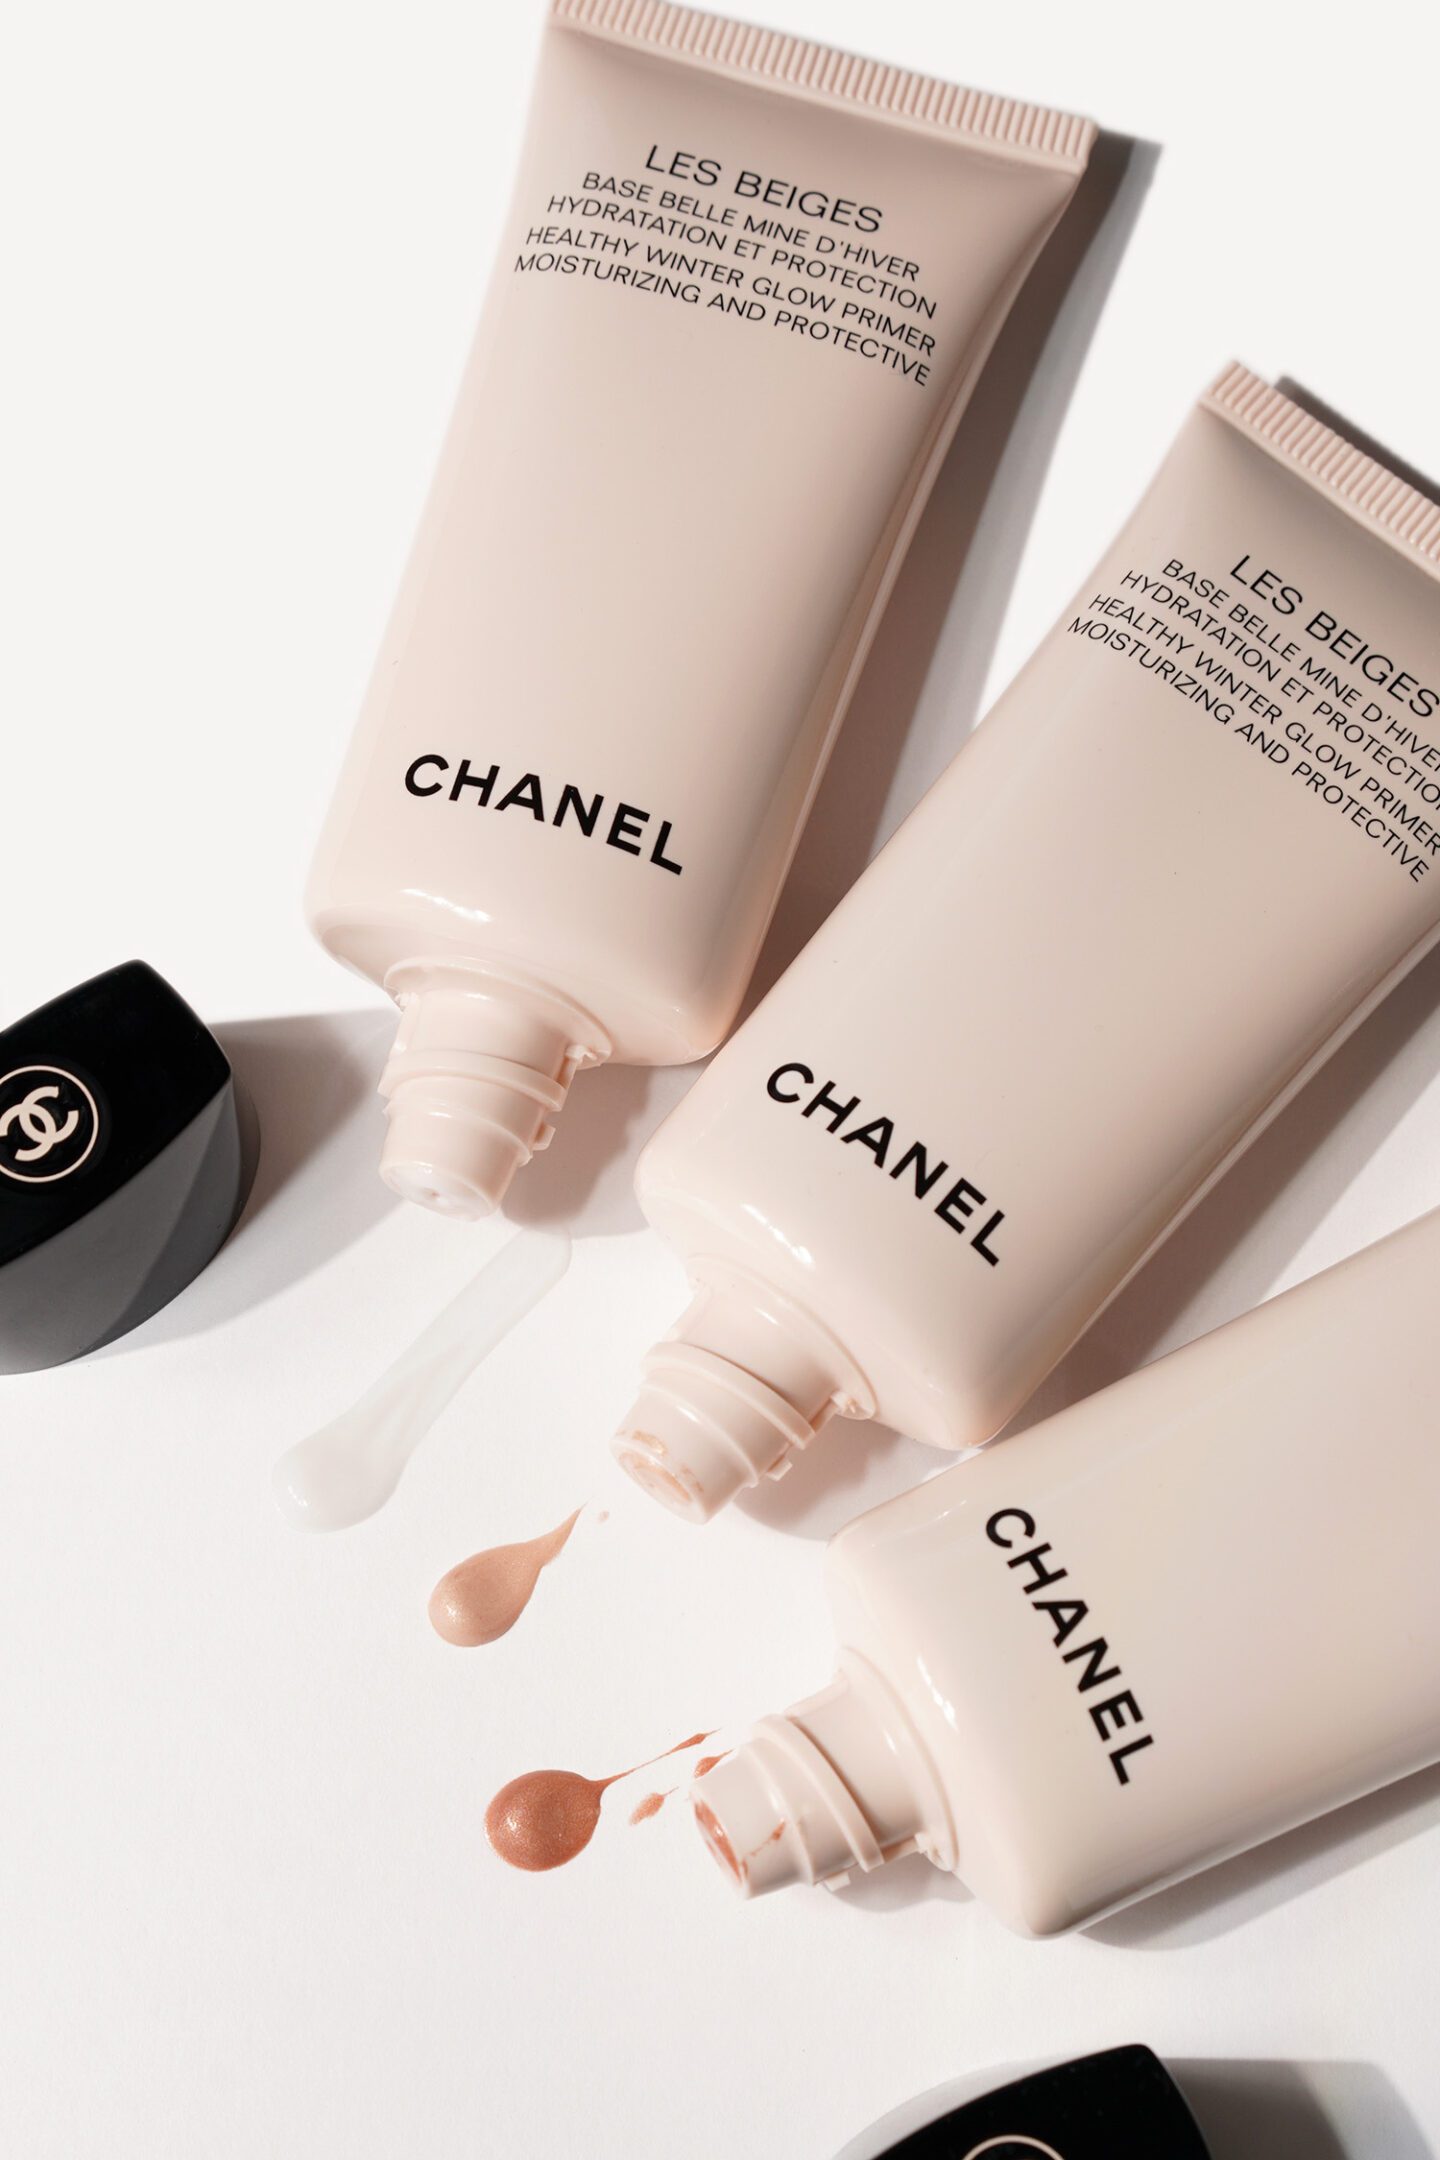 Chanel Les Beiges Healthy Winter Glow Primers 